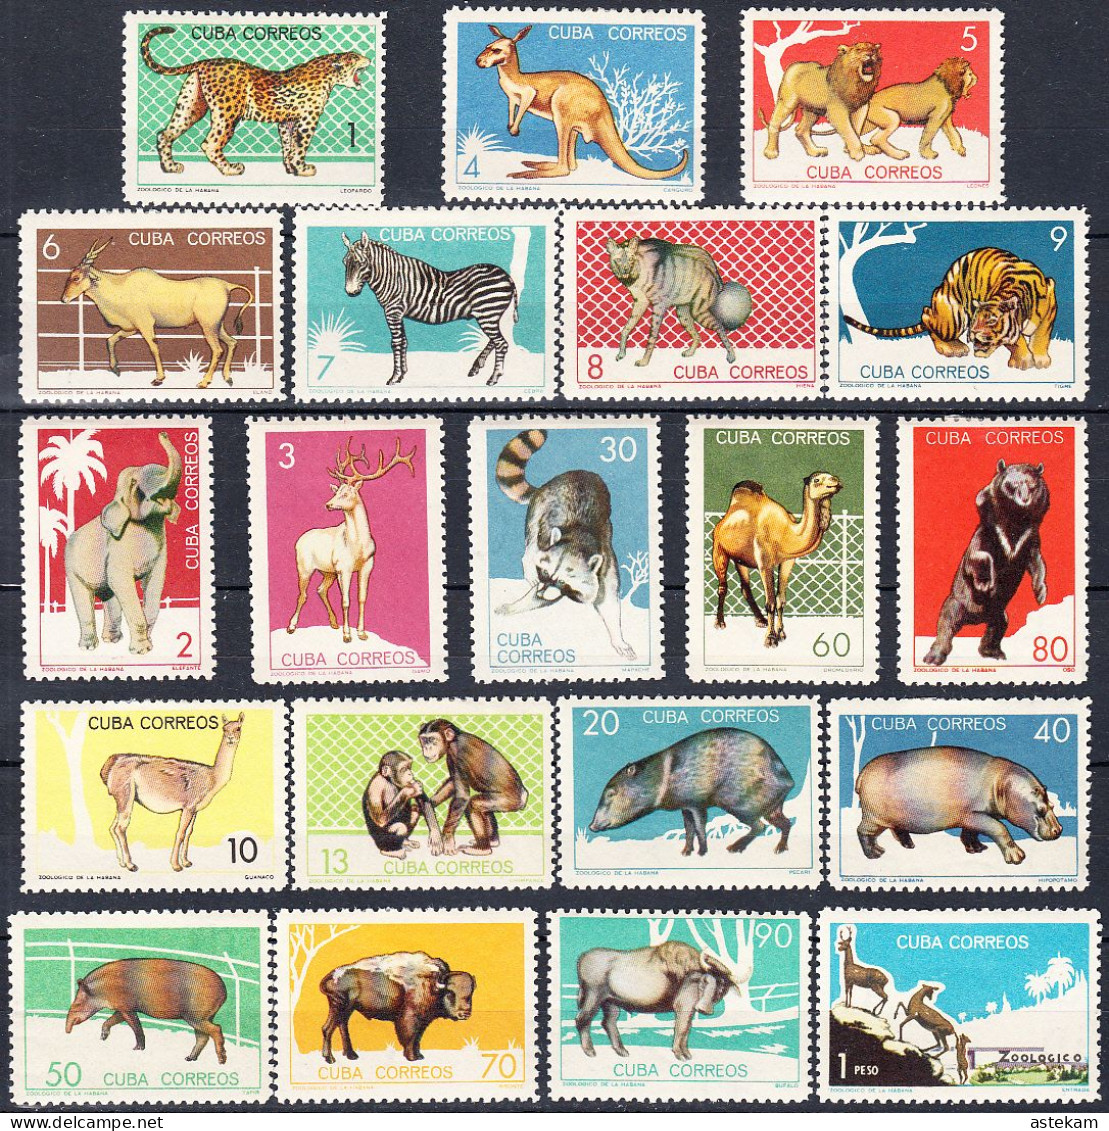 CUBA 1964, FAUNA, WILD ANIMALS From The HAVANA ZOO, COMPLETE MNH SERIES With ORIGINAL GLUE And PATCHES In GOOD QUALITY - Usati